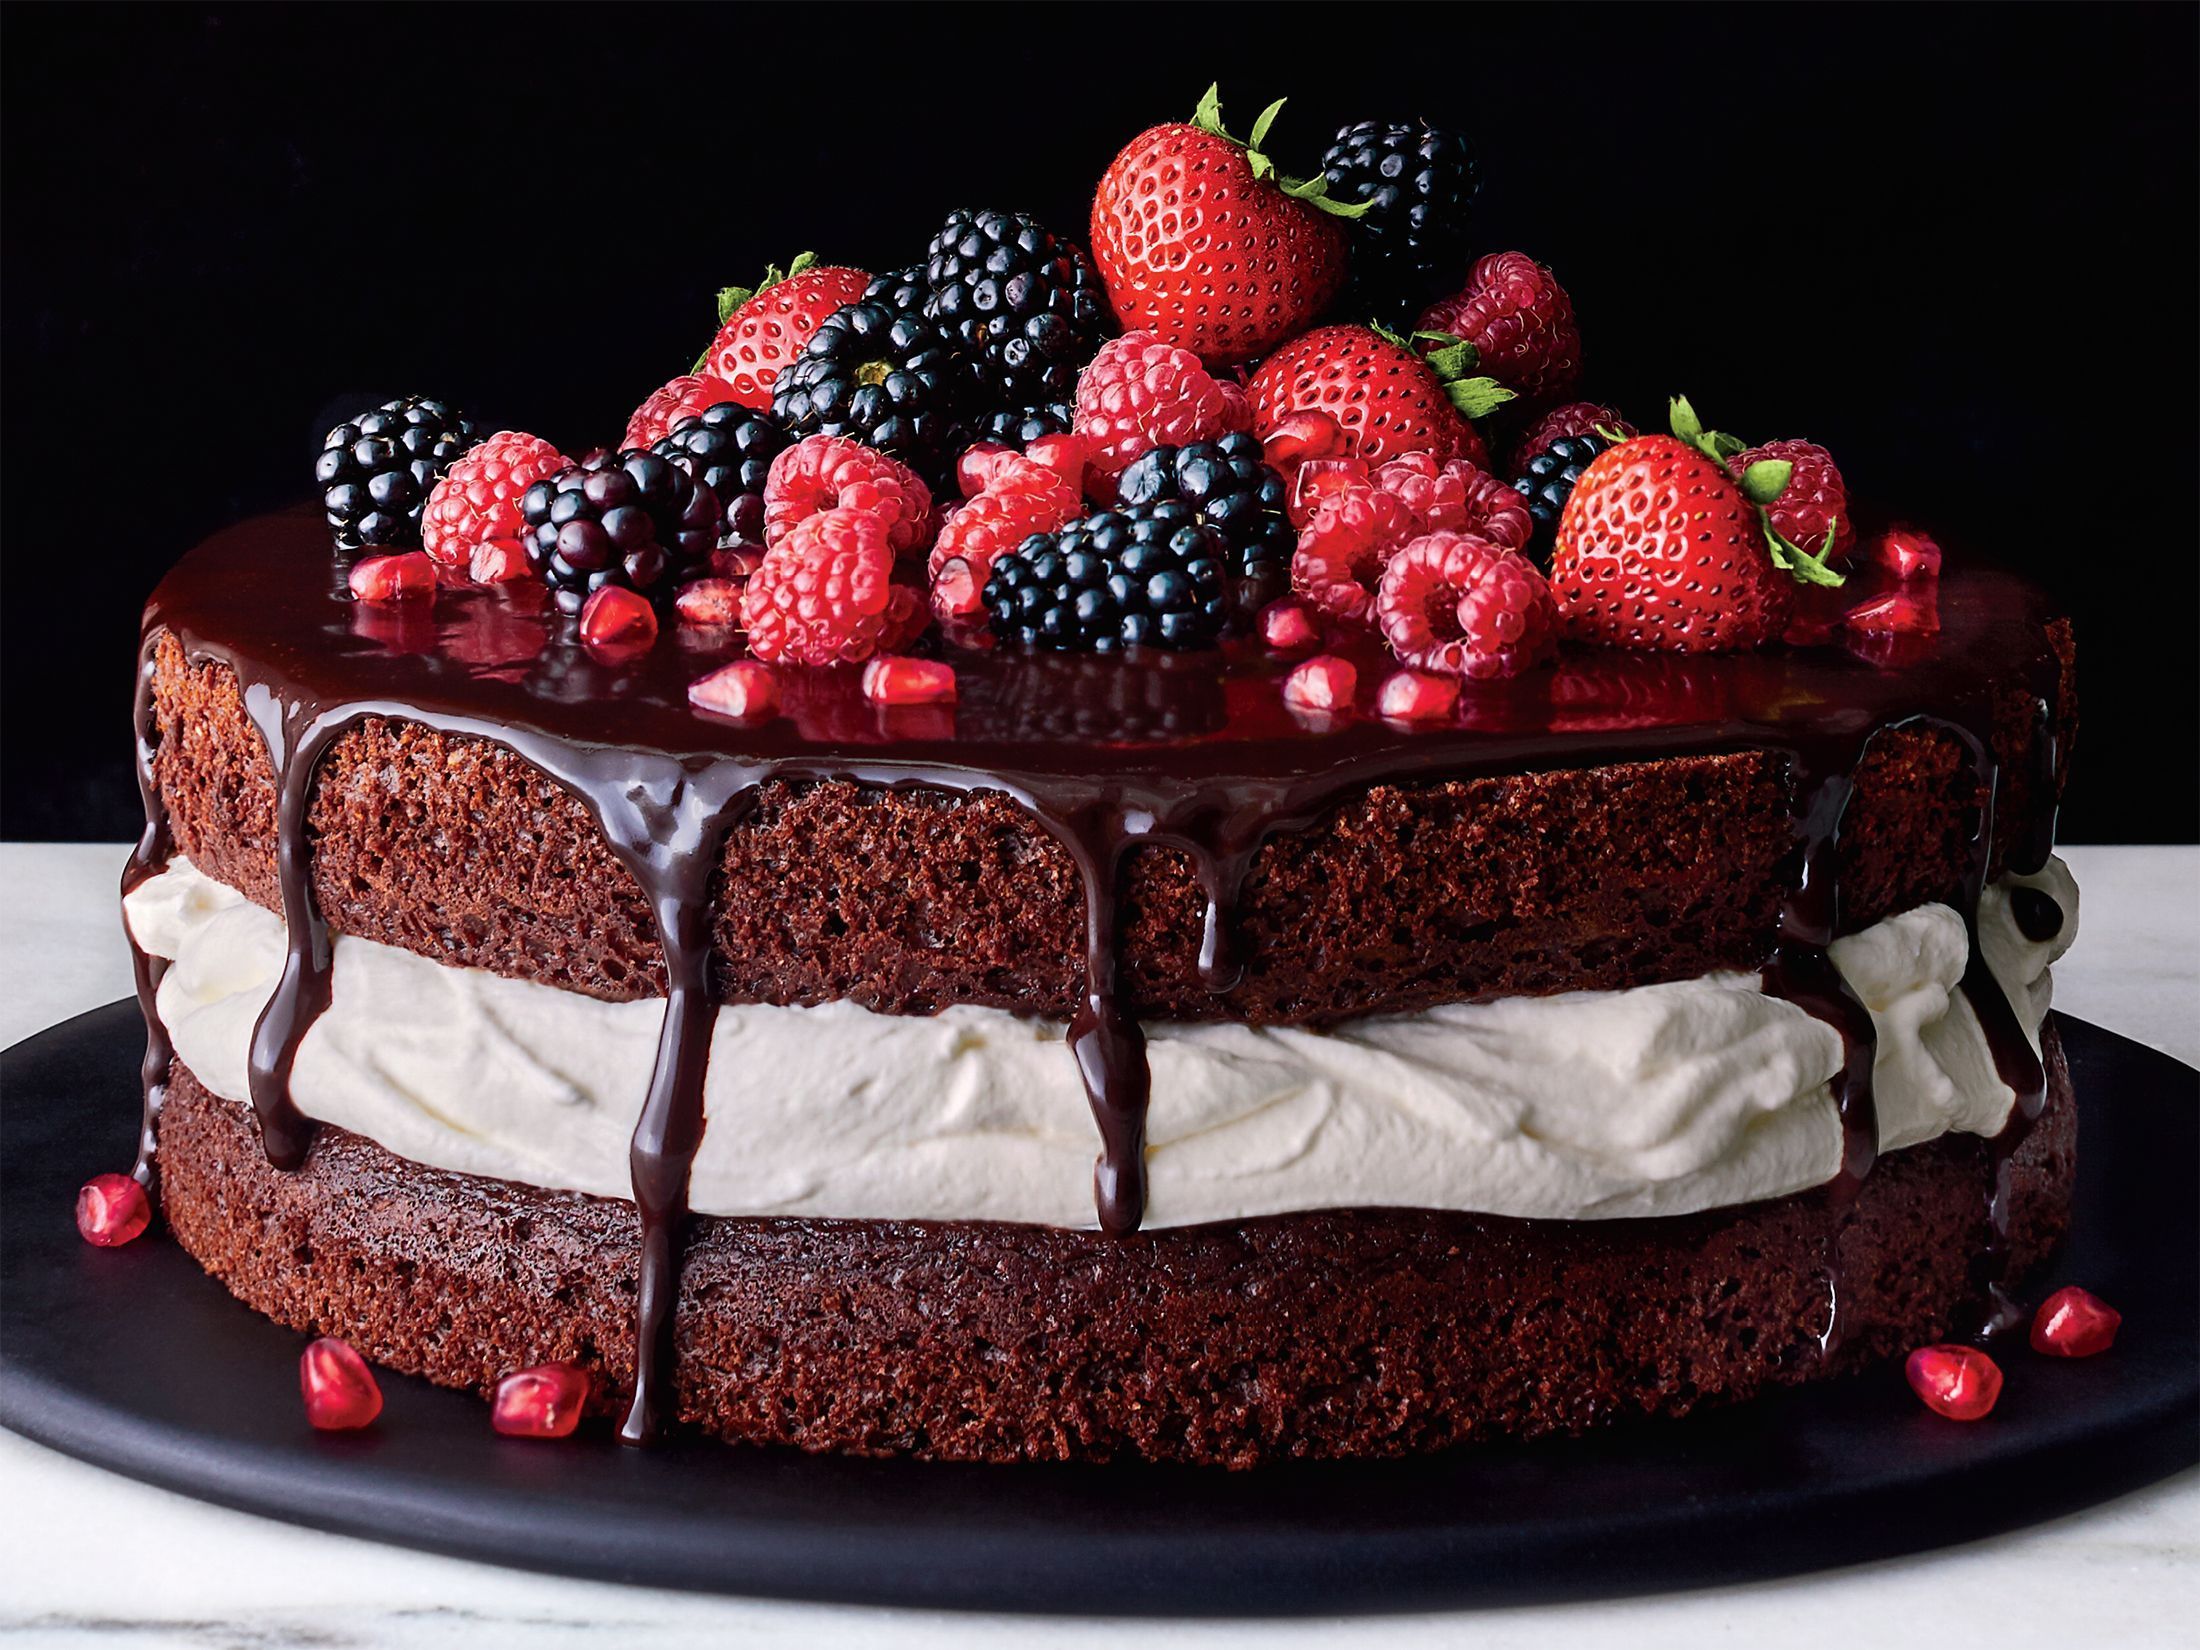 Chocolate-and-Cream Layer Cake -   13 cake Fruit topping ideas